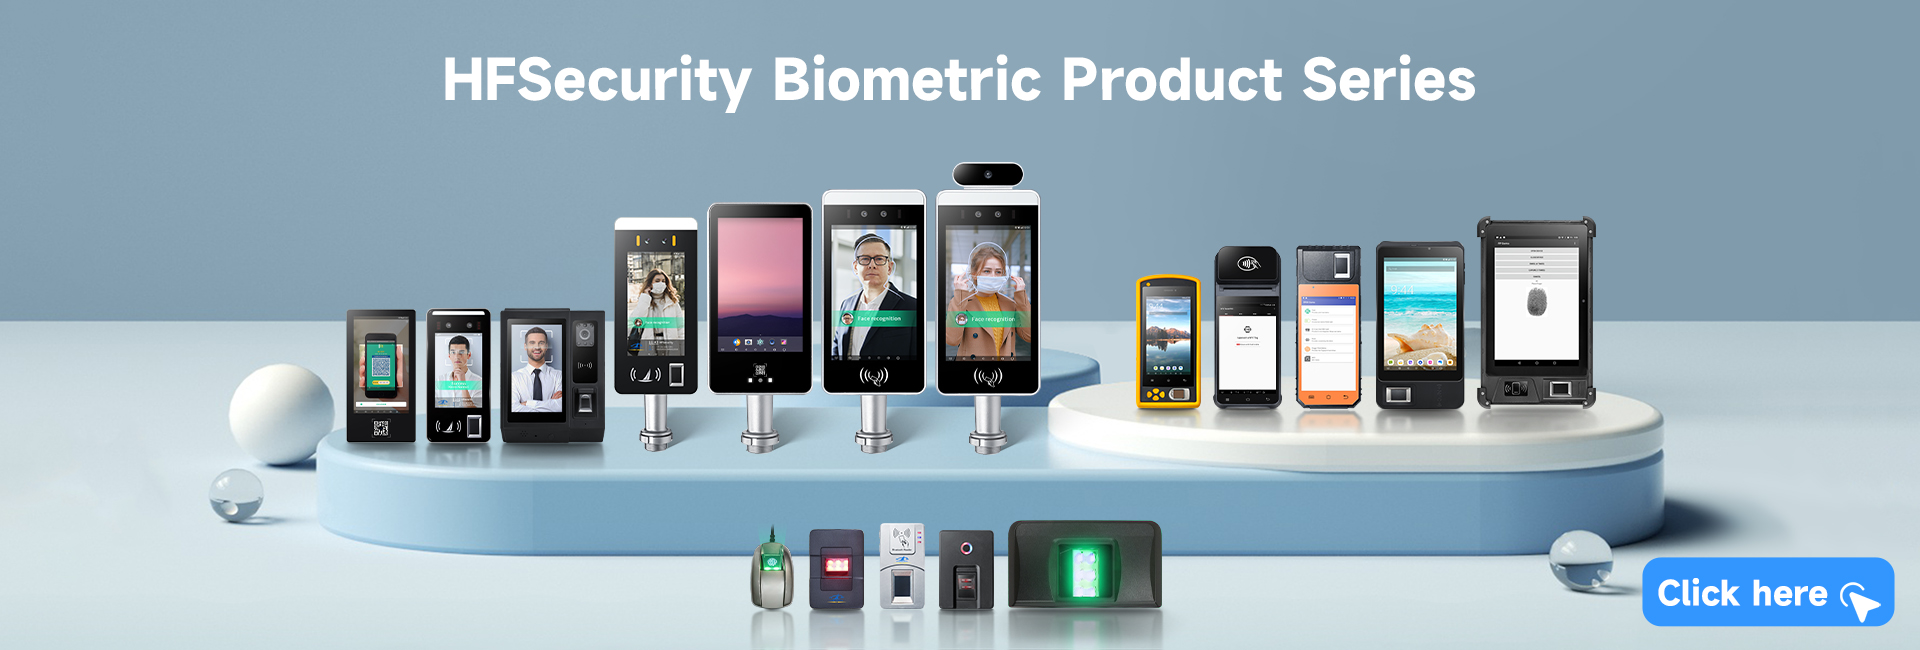 HFSECURITY Biometric Soulutions